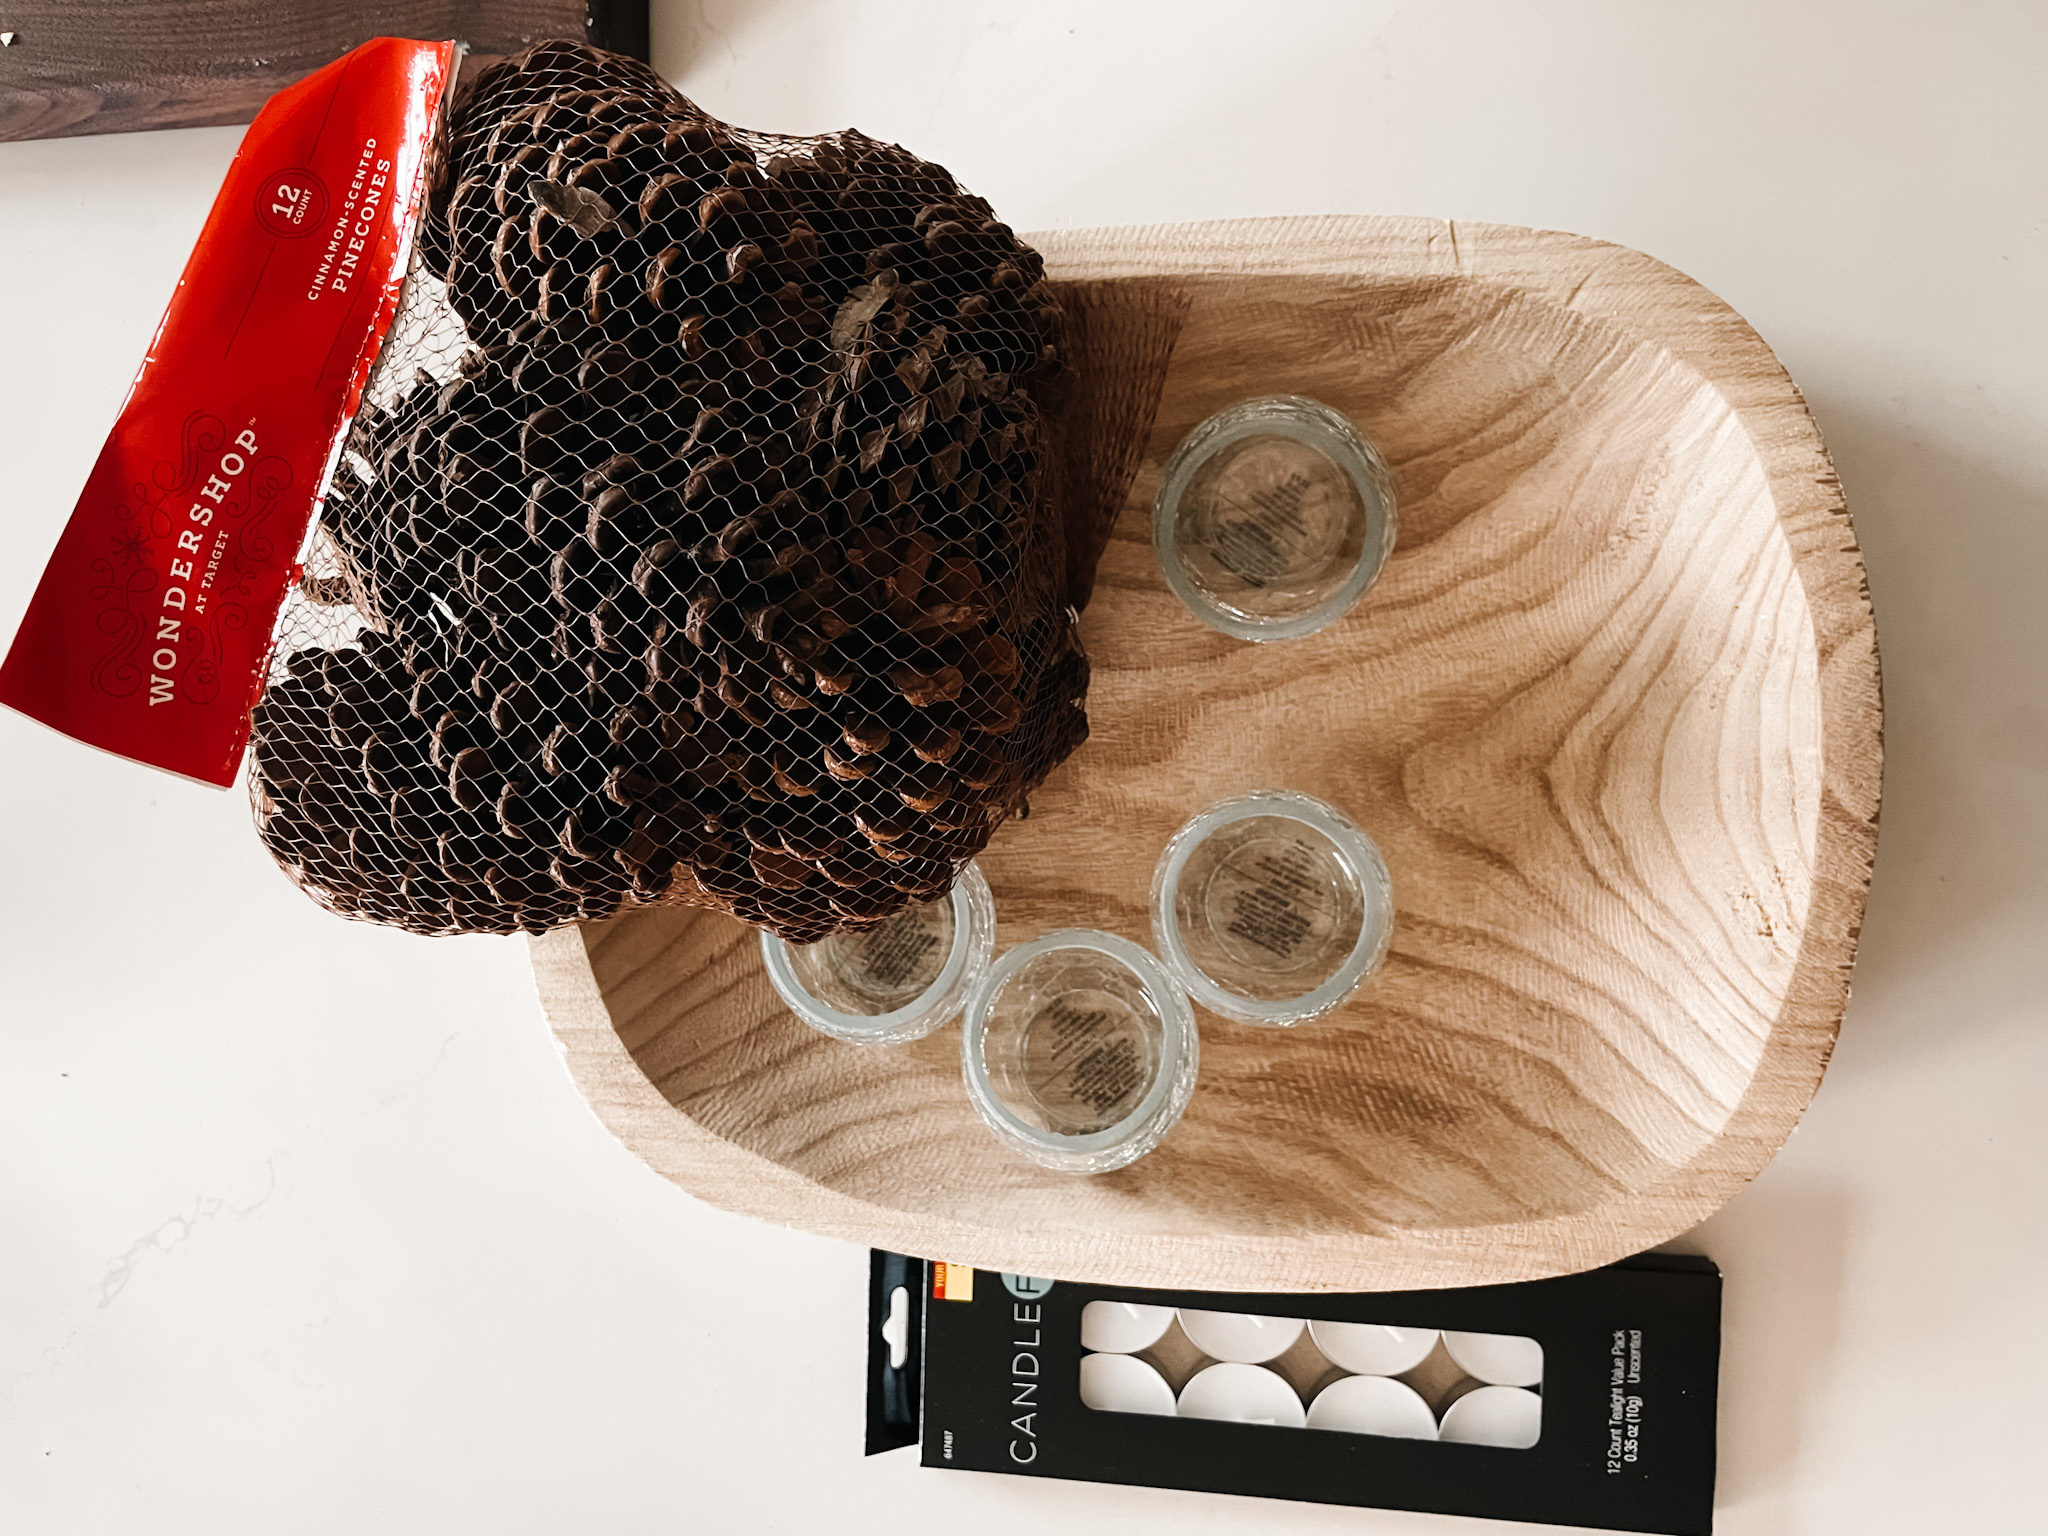 items needed for the christmas coffee table decor: a dough bowl, candles and pinecones